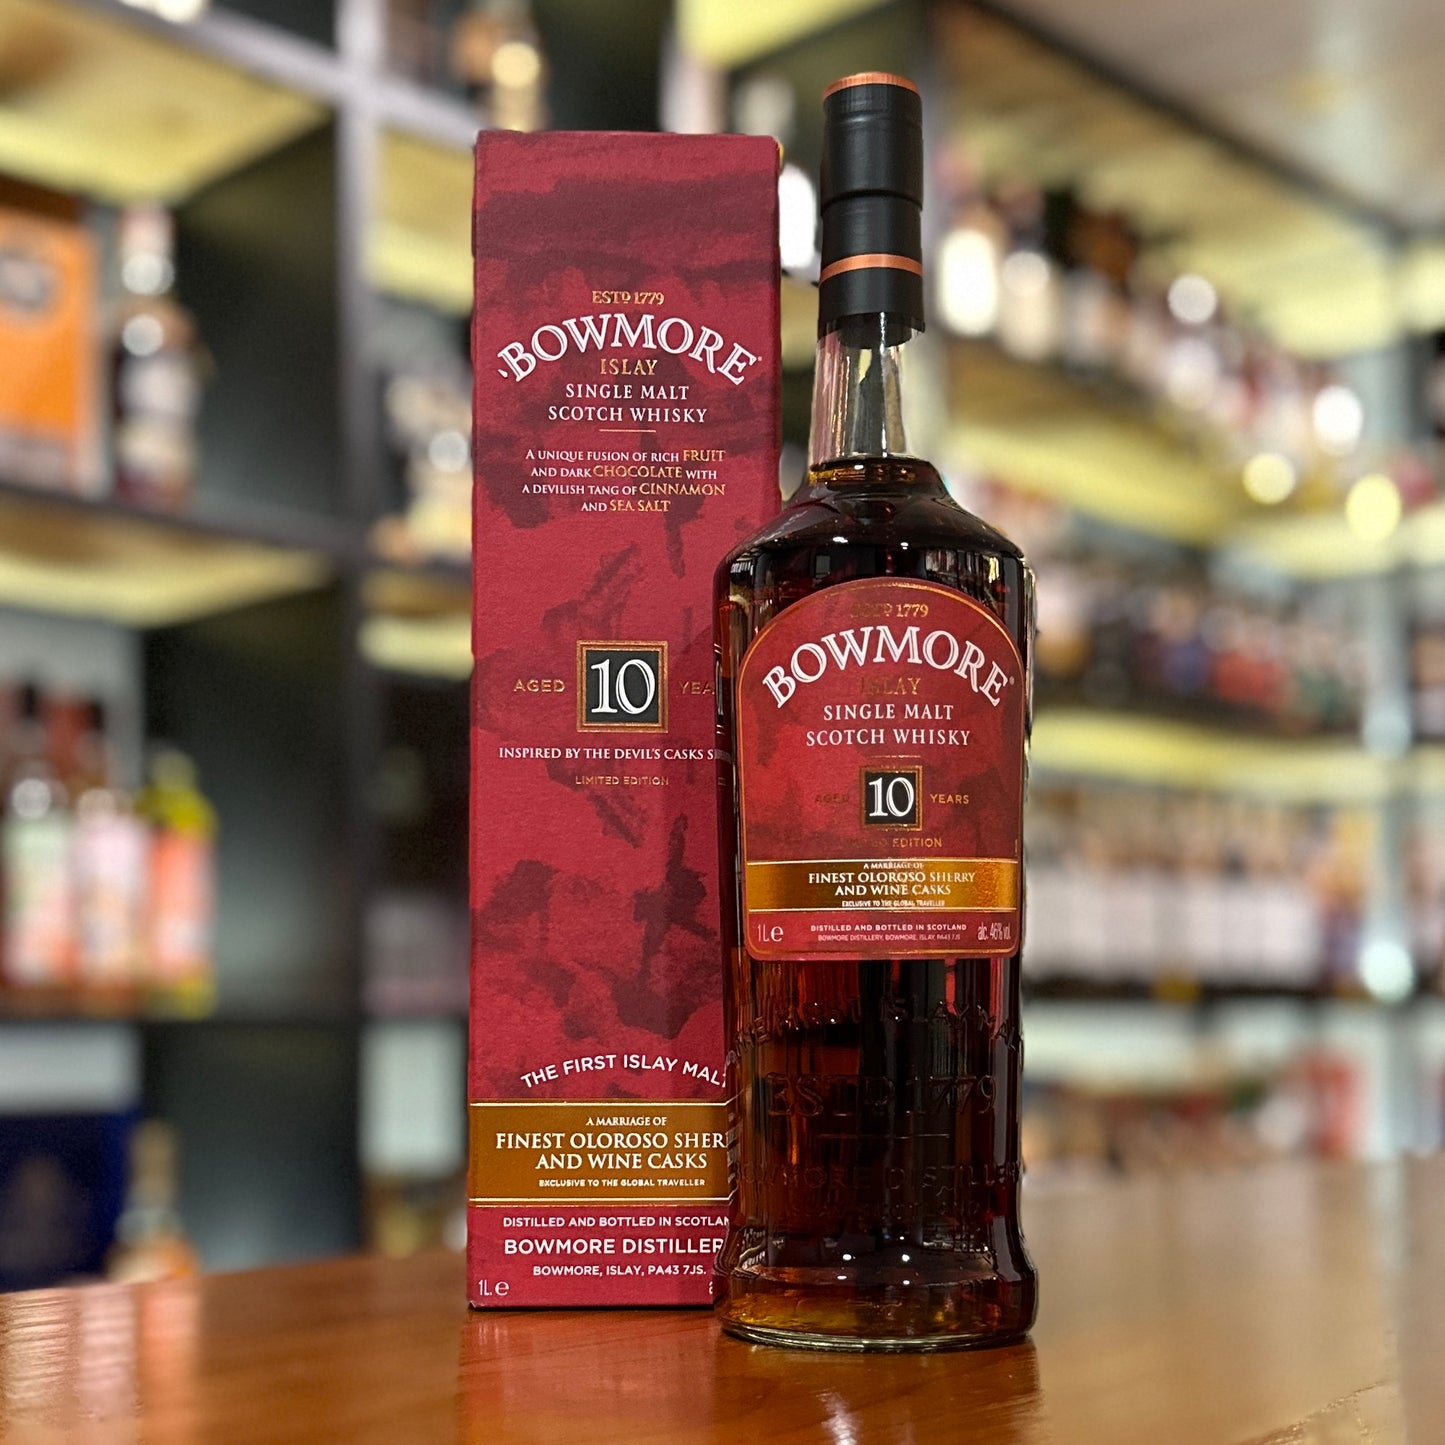 Bowmore 10 Year Old Inspired by the Devil’s Cask Series Single Malt Scotch Whisky